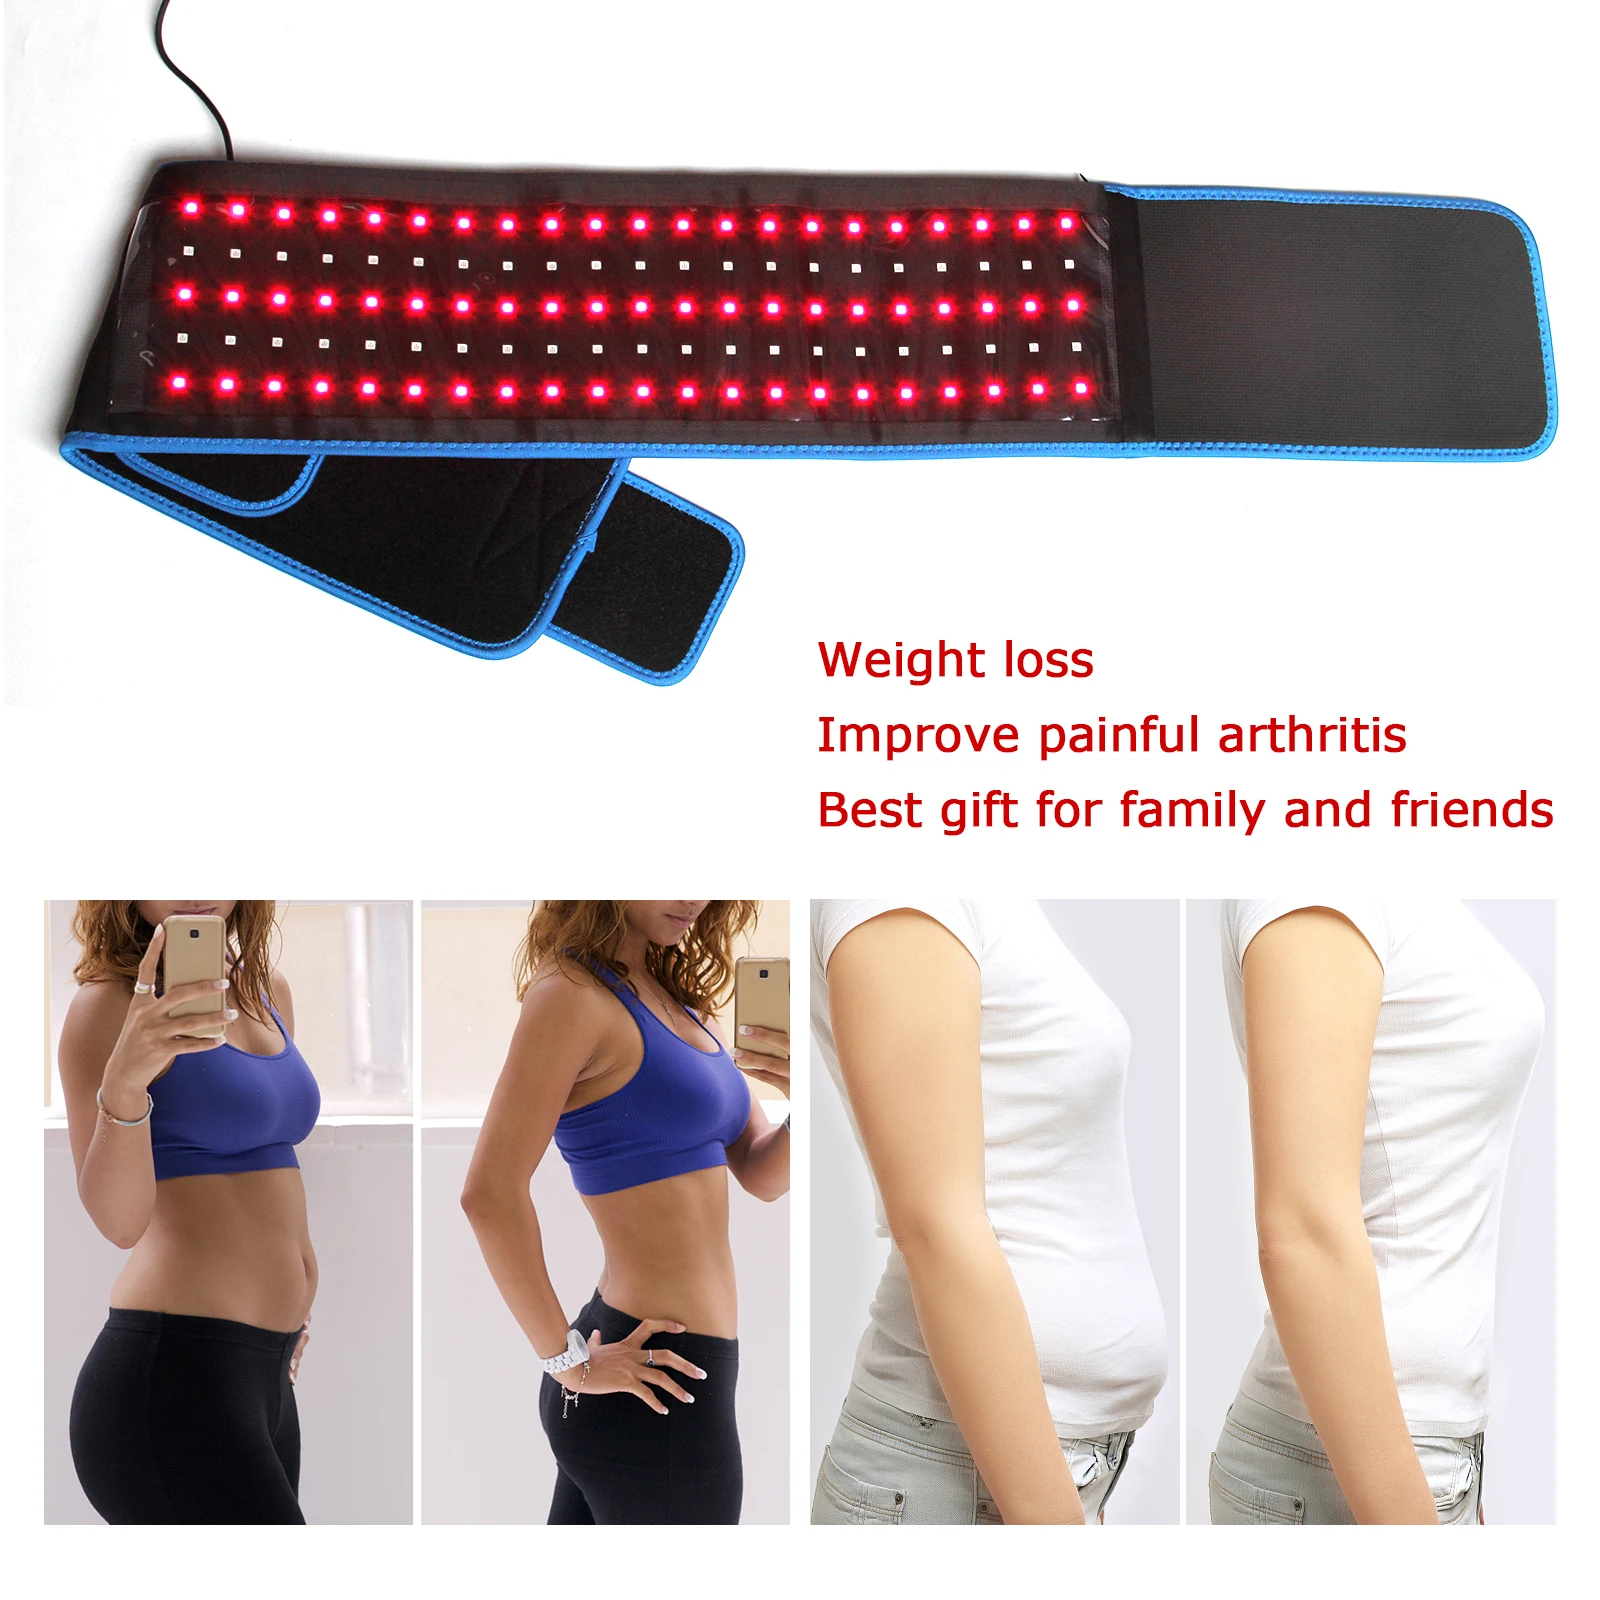 16W 660nm 850nm LED Red Light Therapy Near Infrared Light Therapy Devices Large Pads Wearable Wrap for Pain Relief at Home